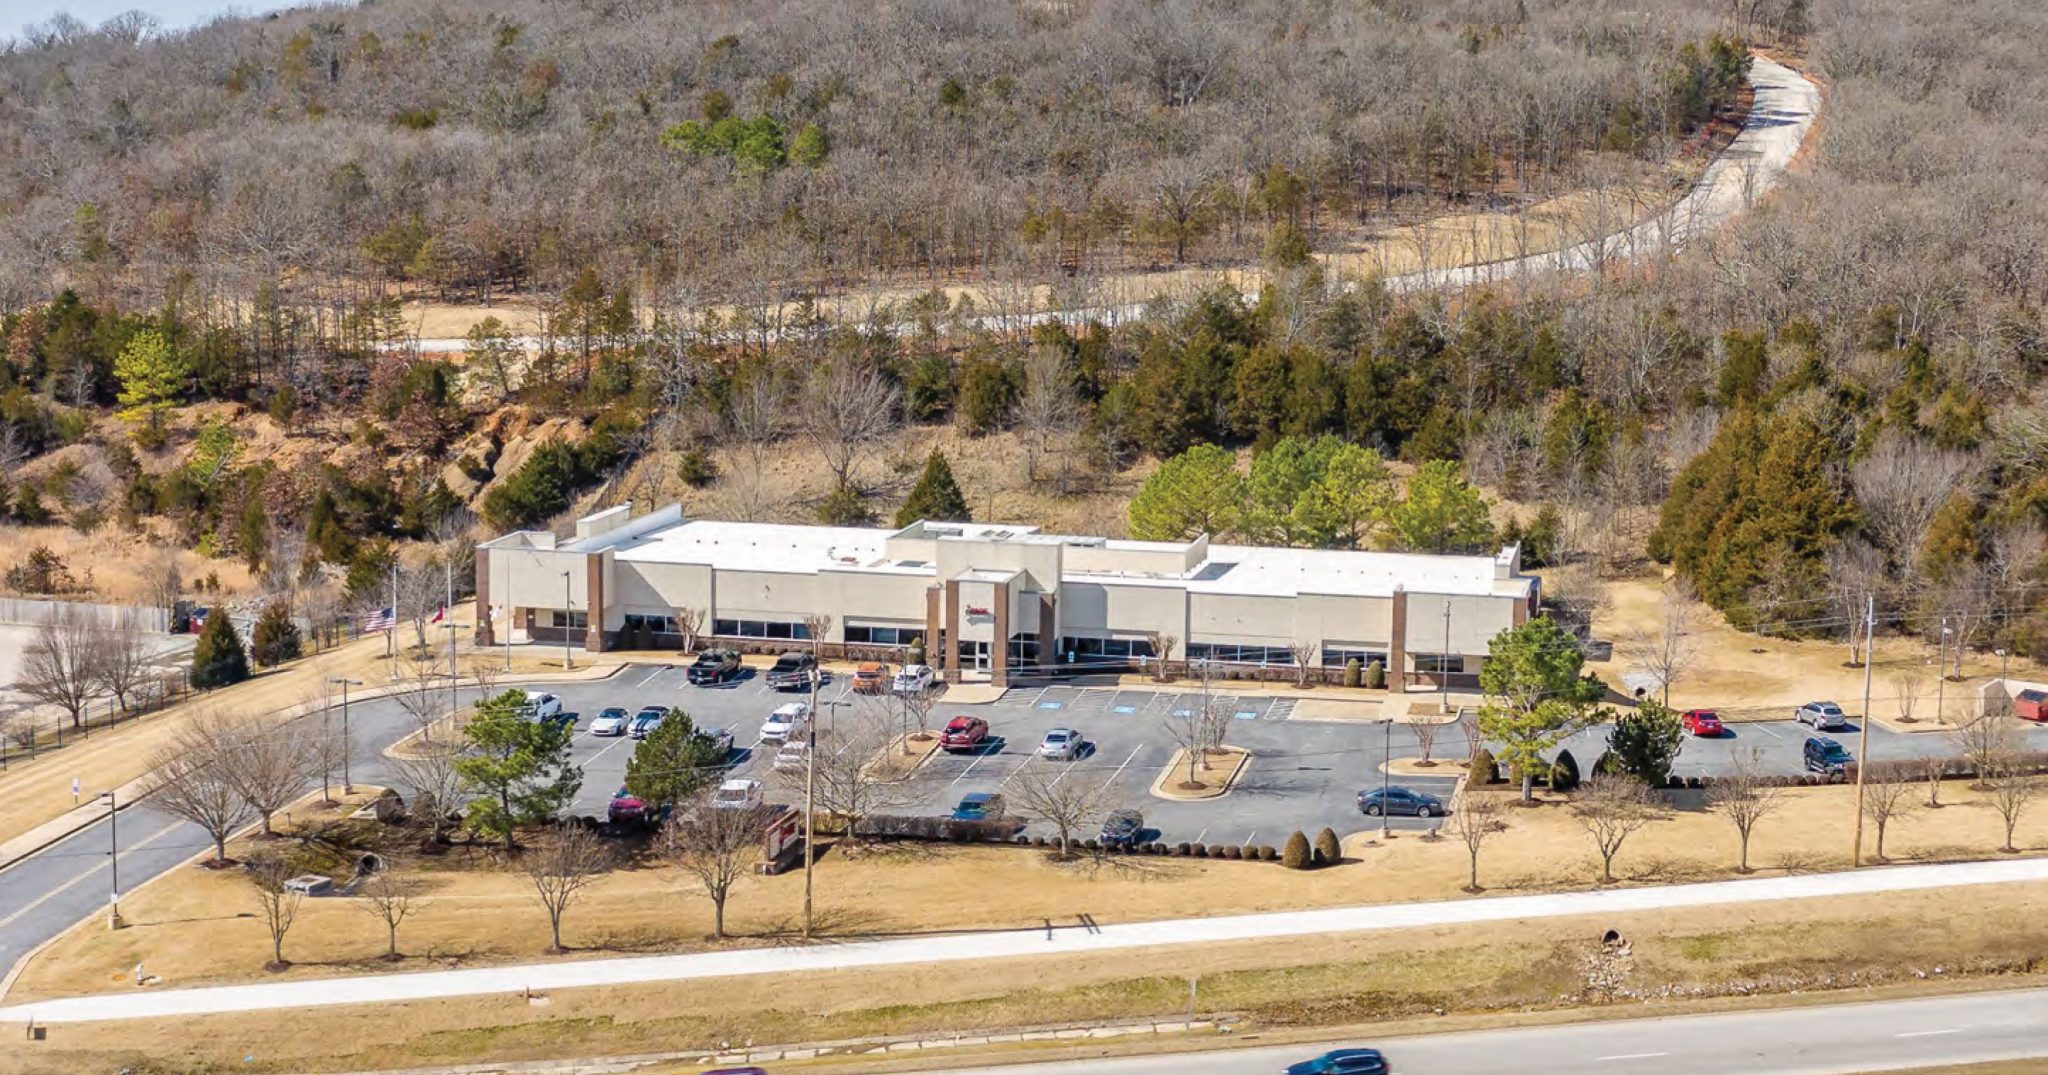 University of Arkansas completes $3.7M purchase of former Pace Industries HQ in Fayetteville